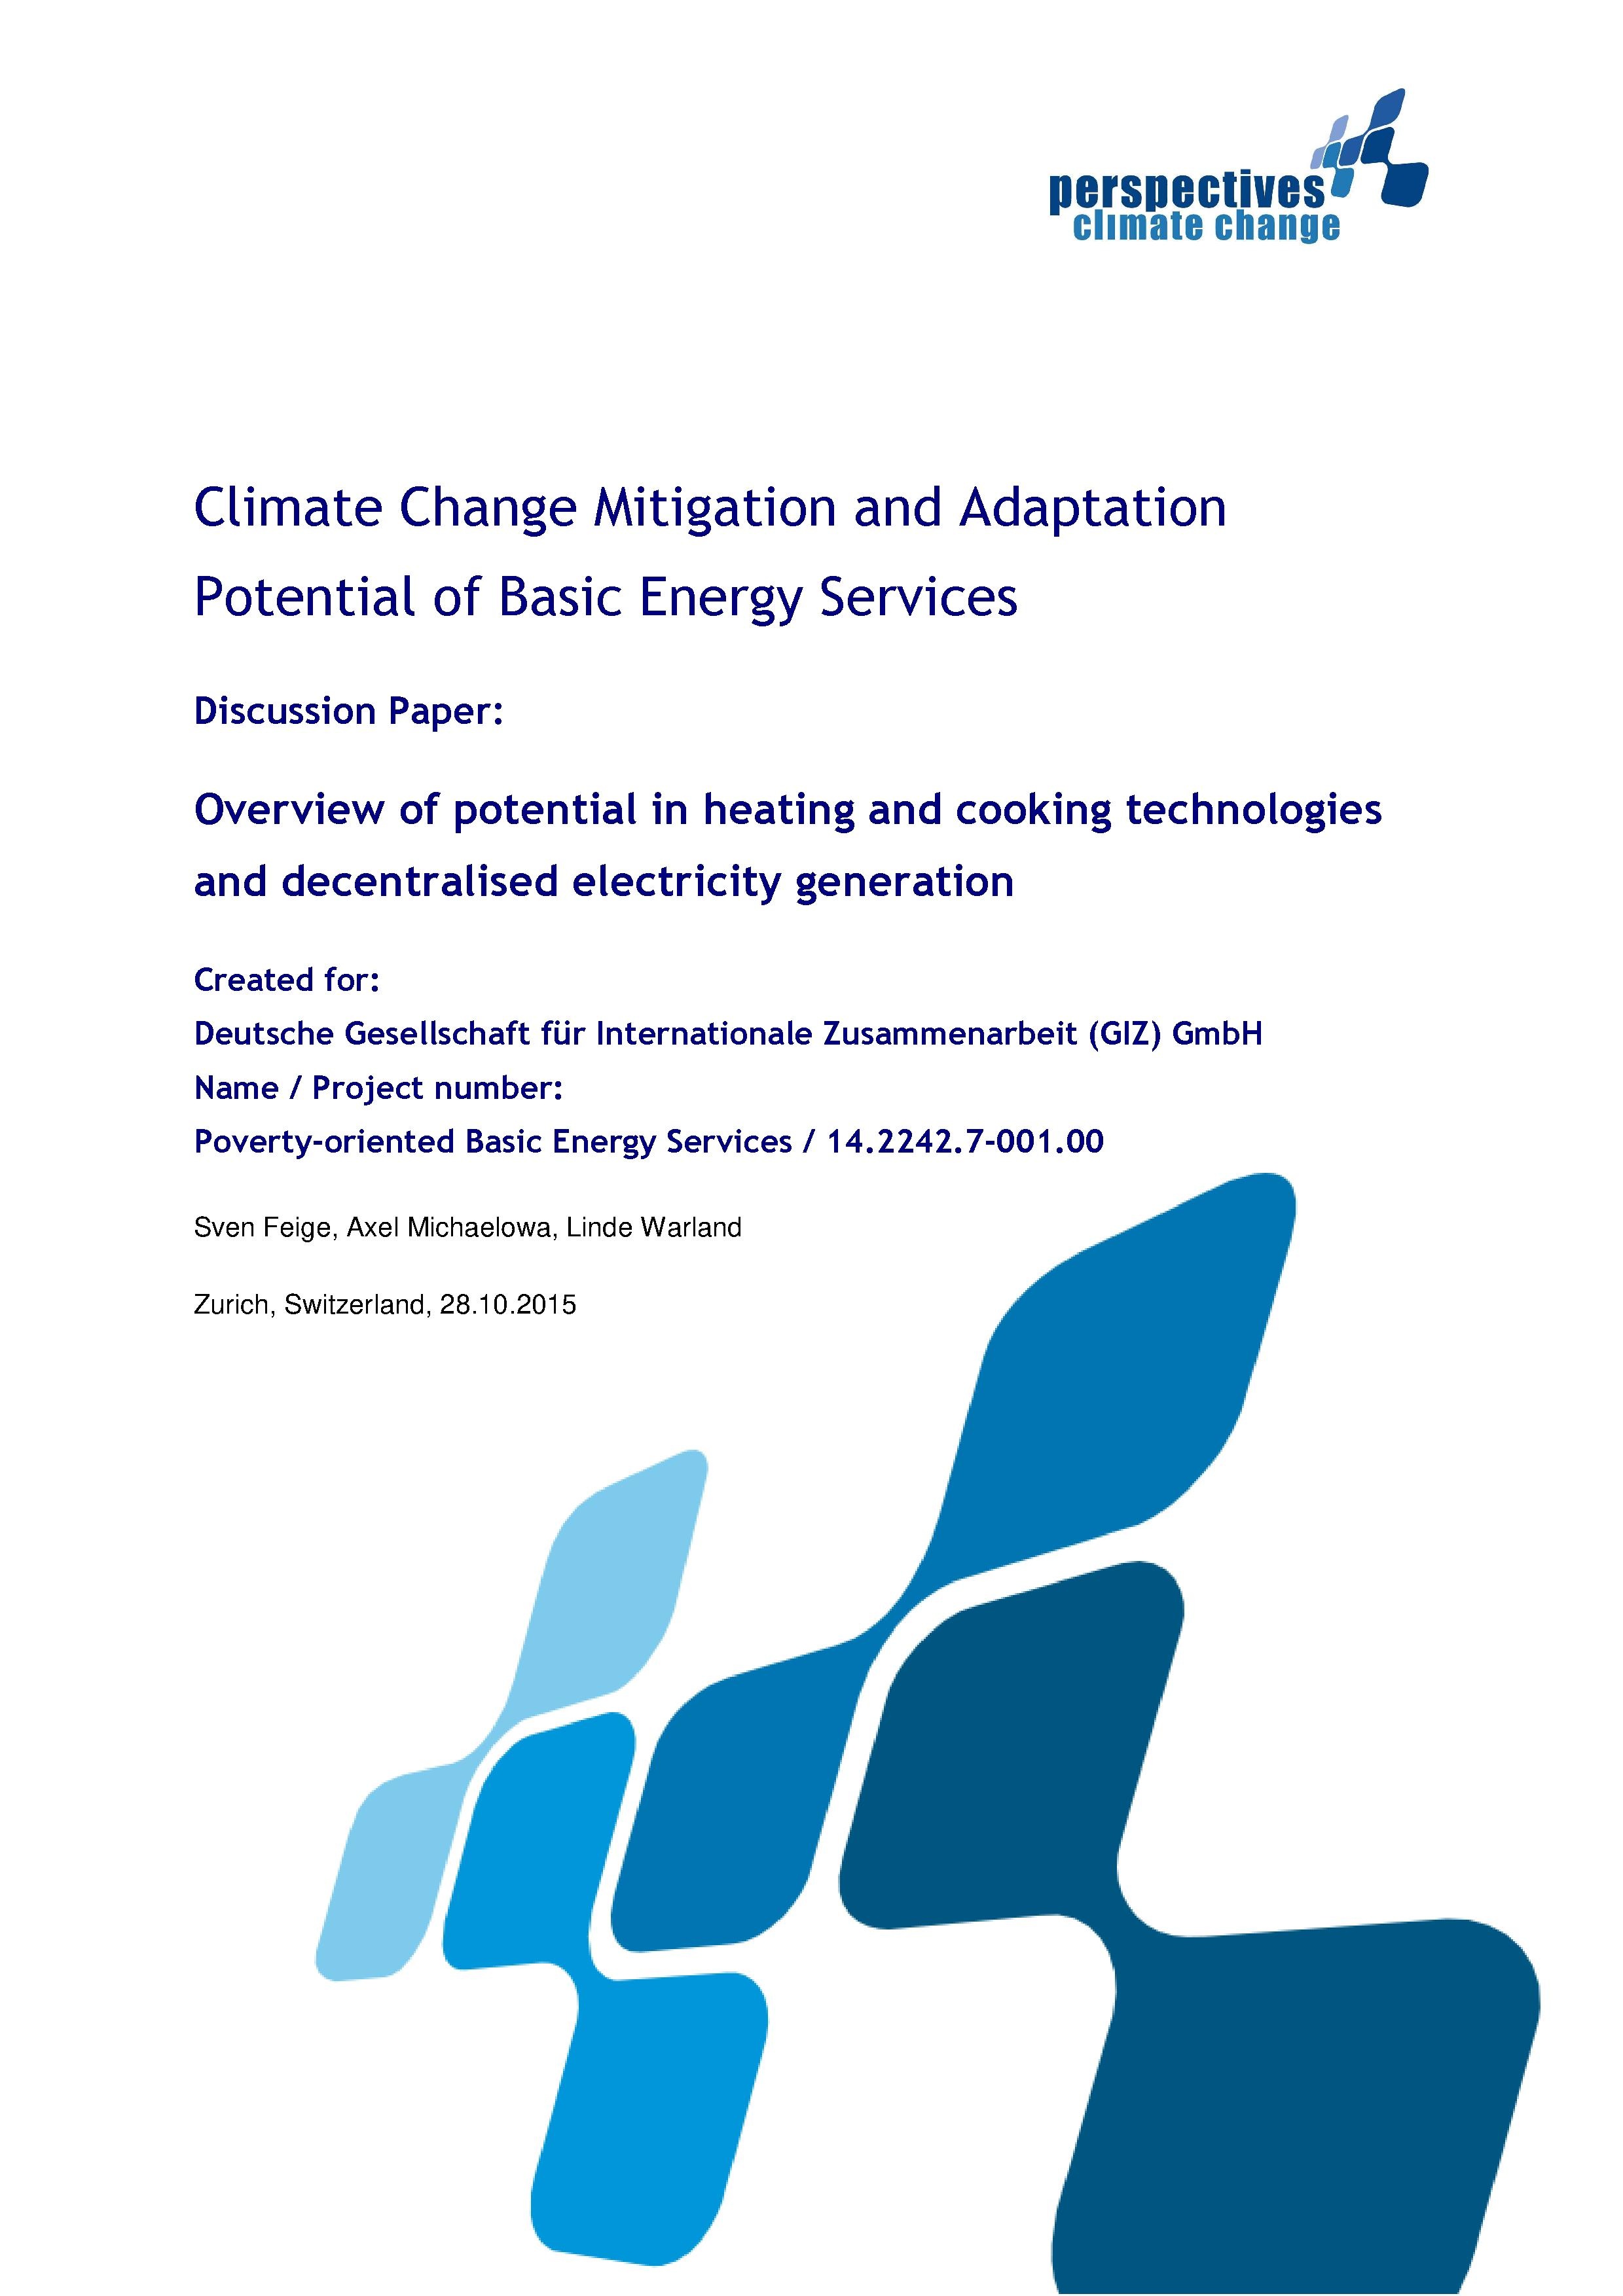 Climate Change Energy Adoption and Mitigation Potential of Bssic Energy Services